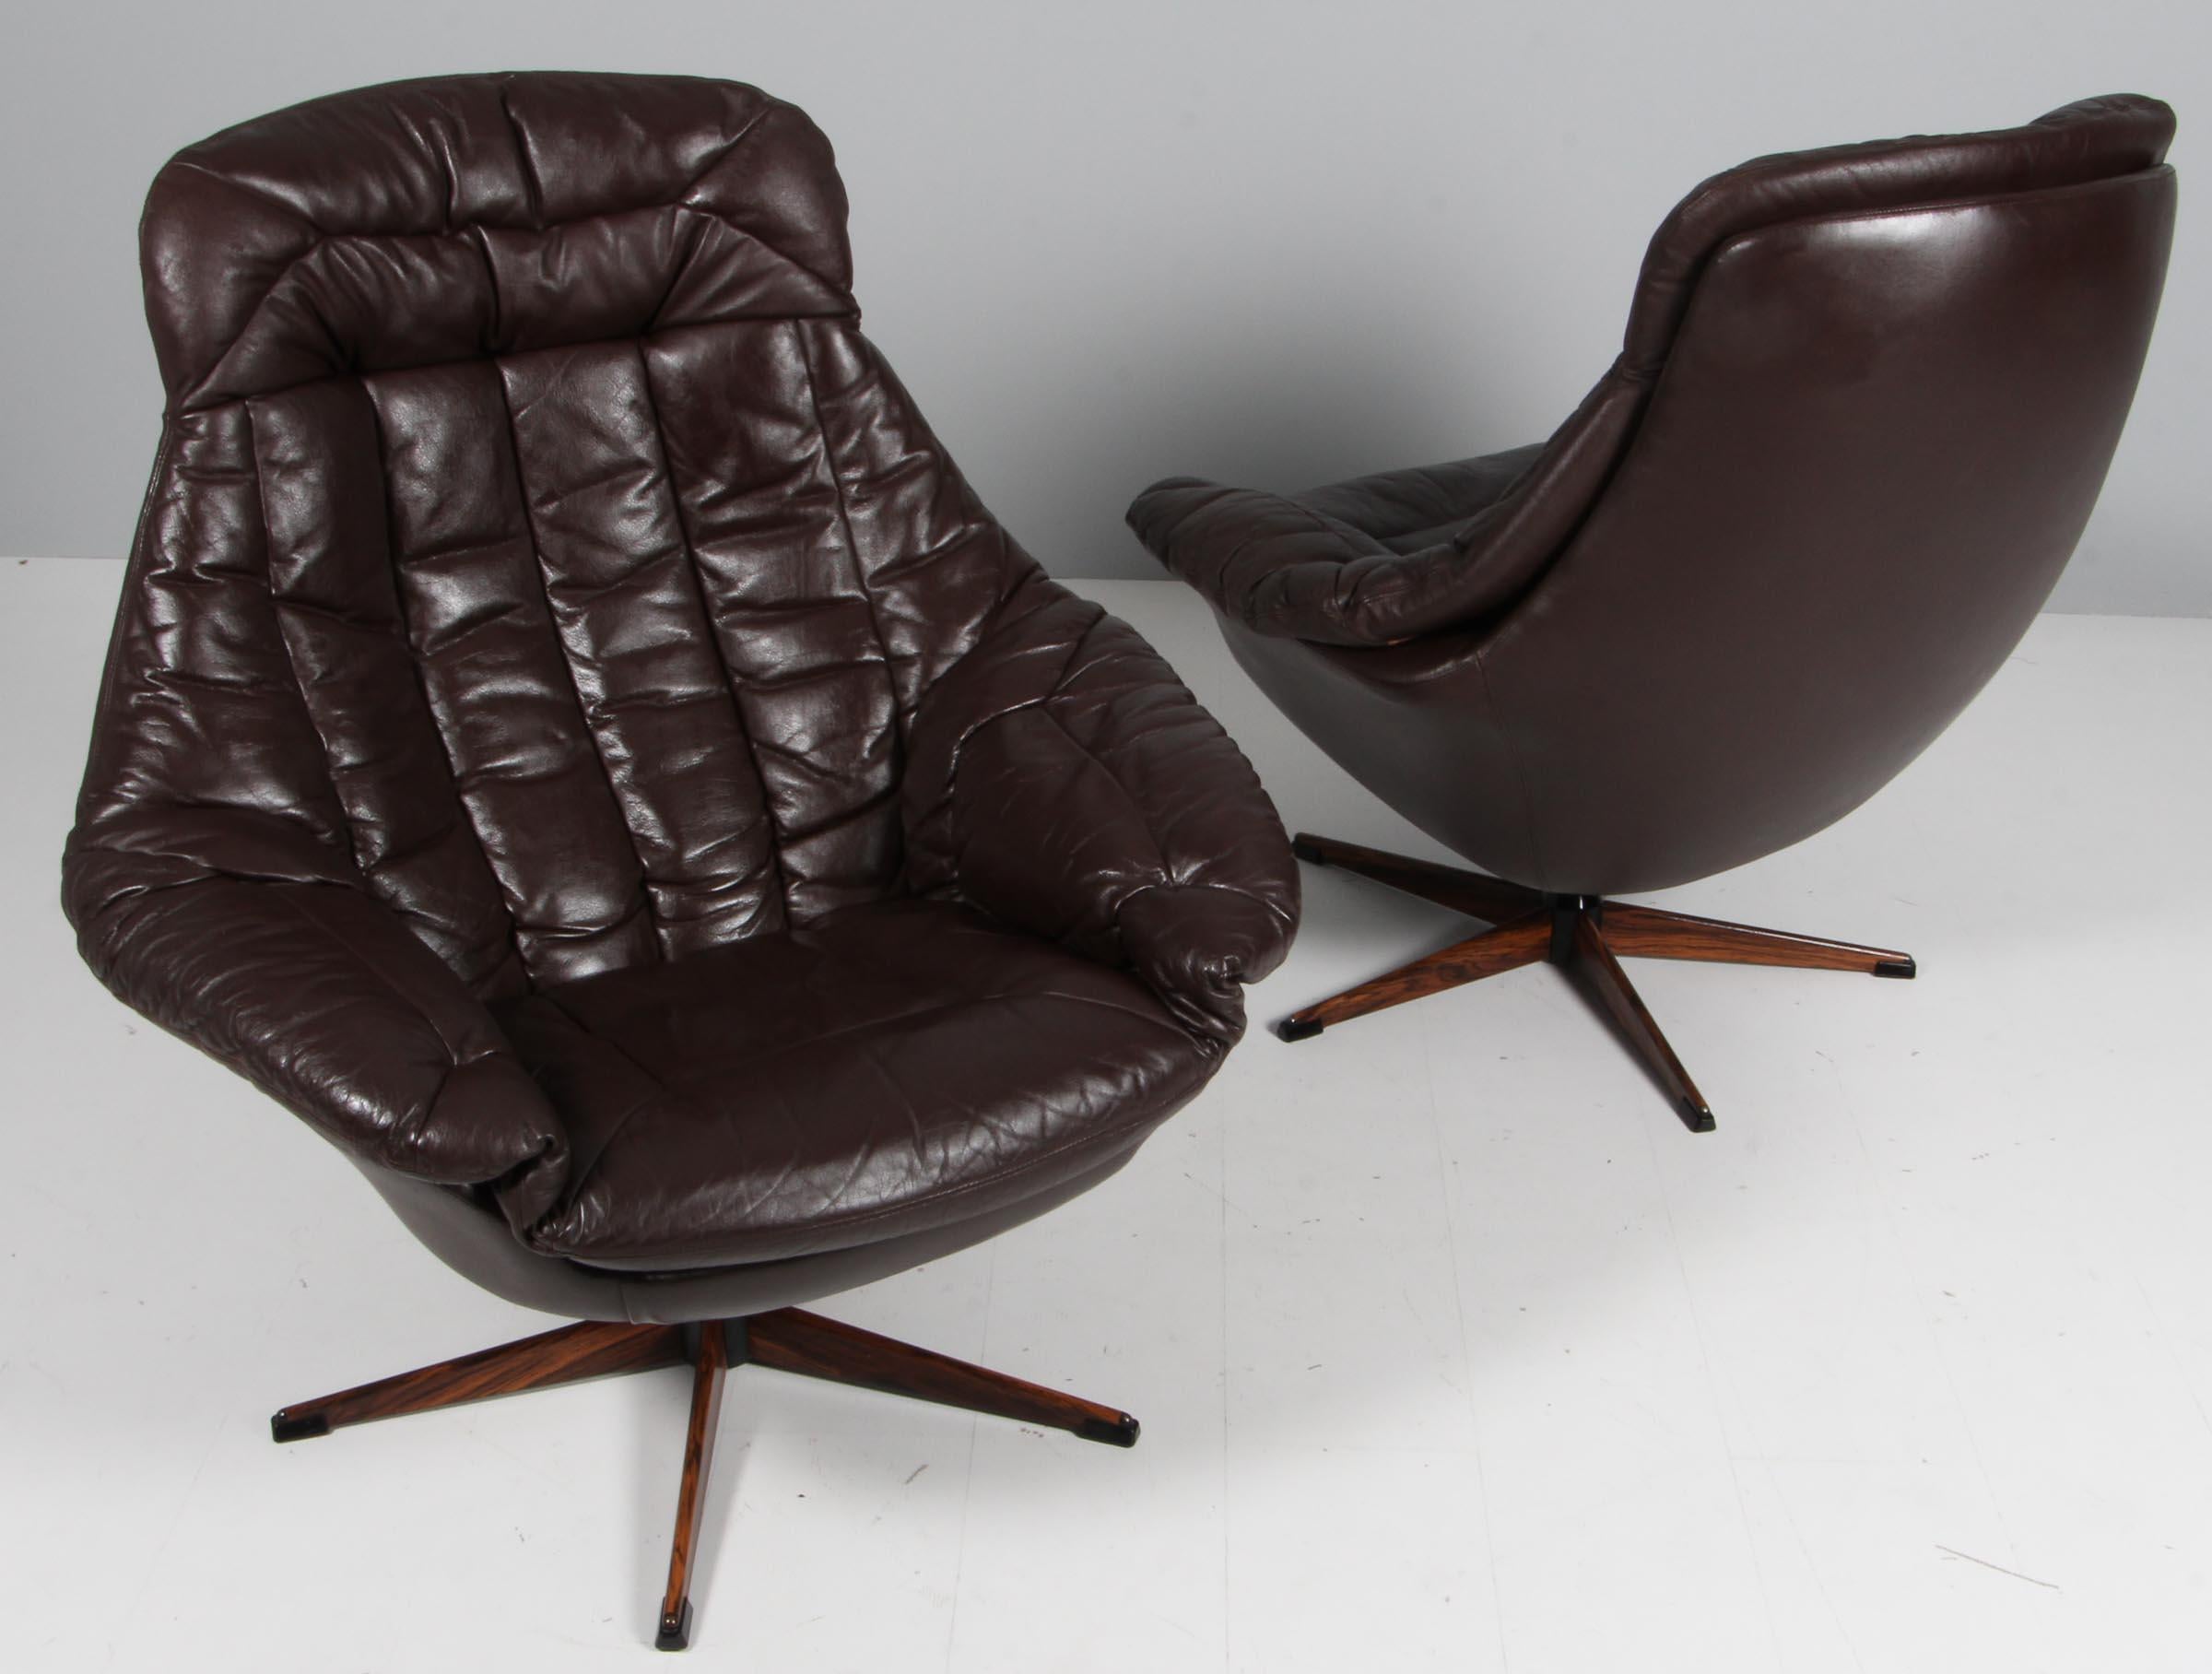 Scandinavian Modern H. W. Klein Lounge Chair mode silhouette in brown leather and swivel base